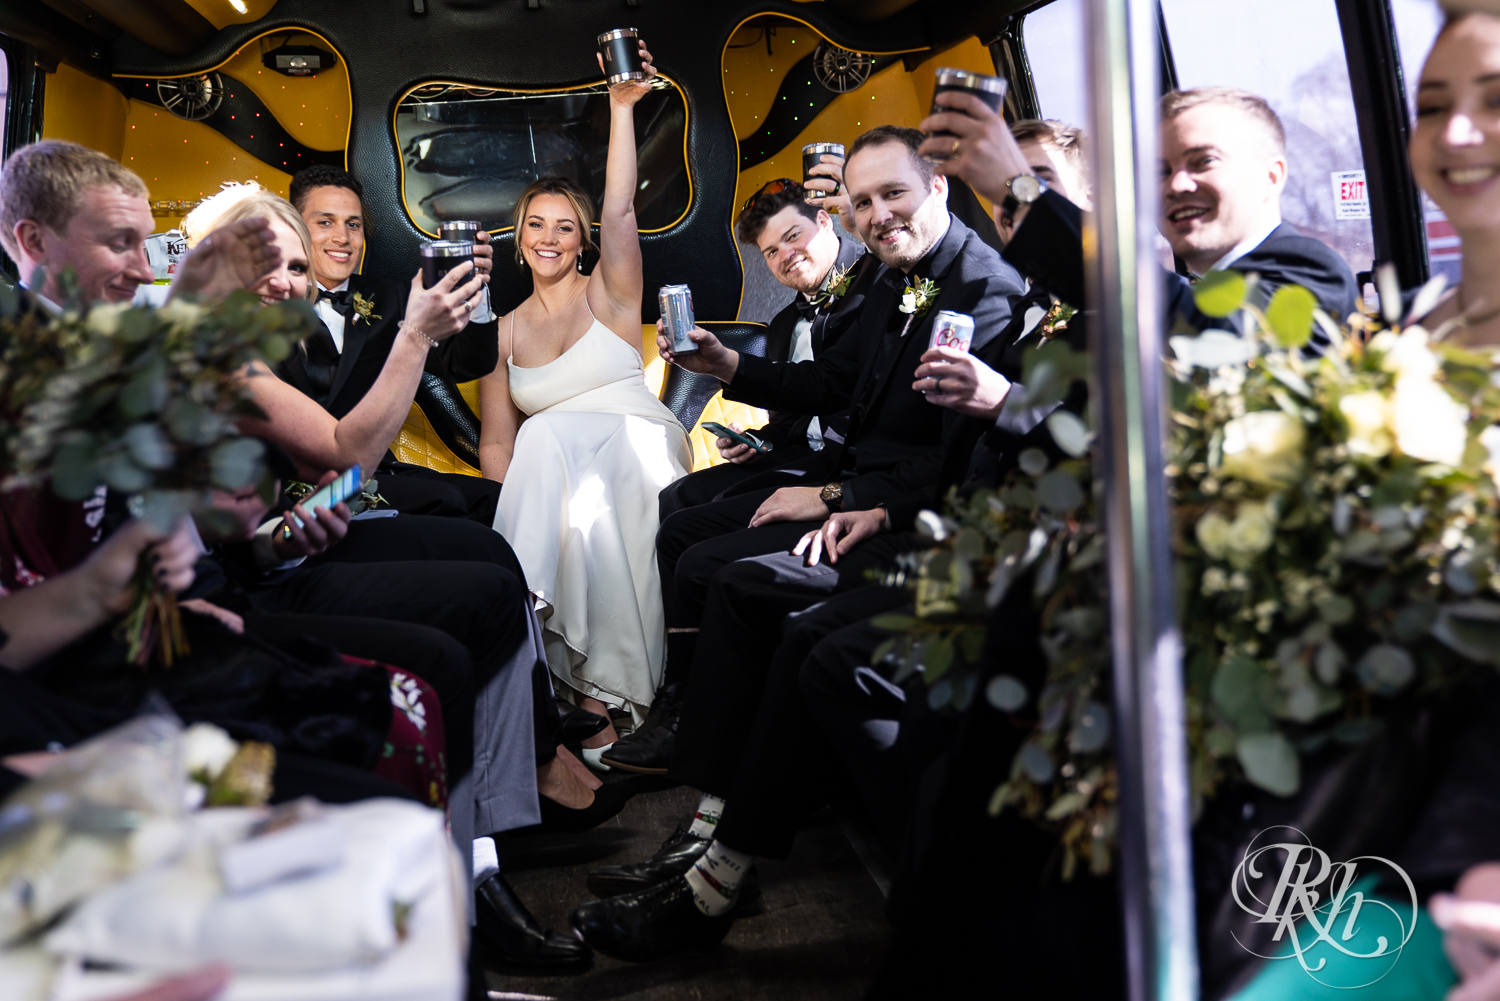 Bride and groom toast with wedding party on party bus after wedding ceremony in Faribault, Minnesota.